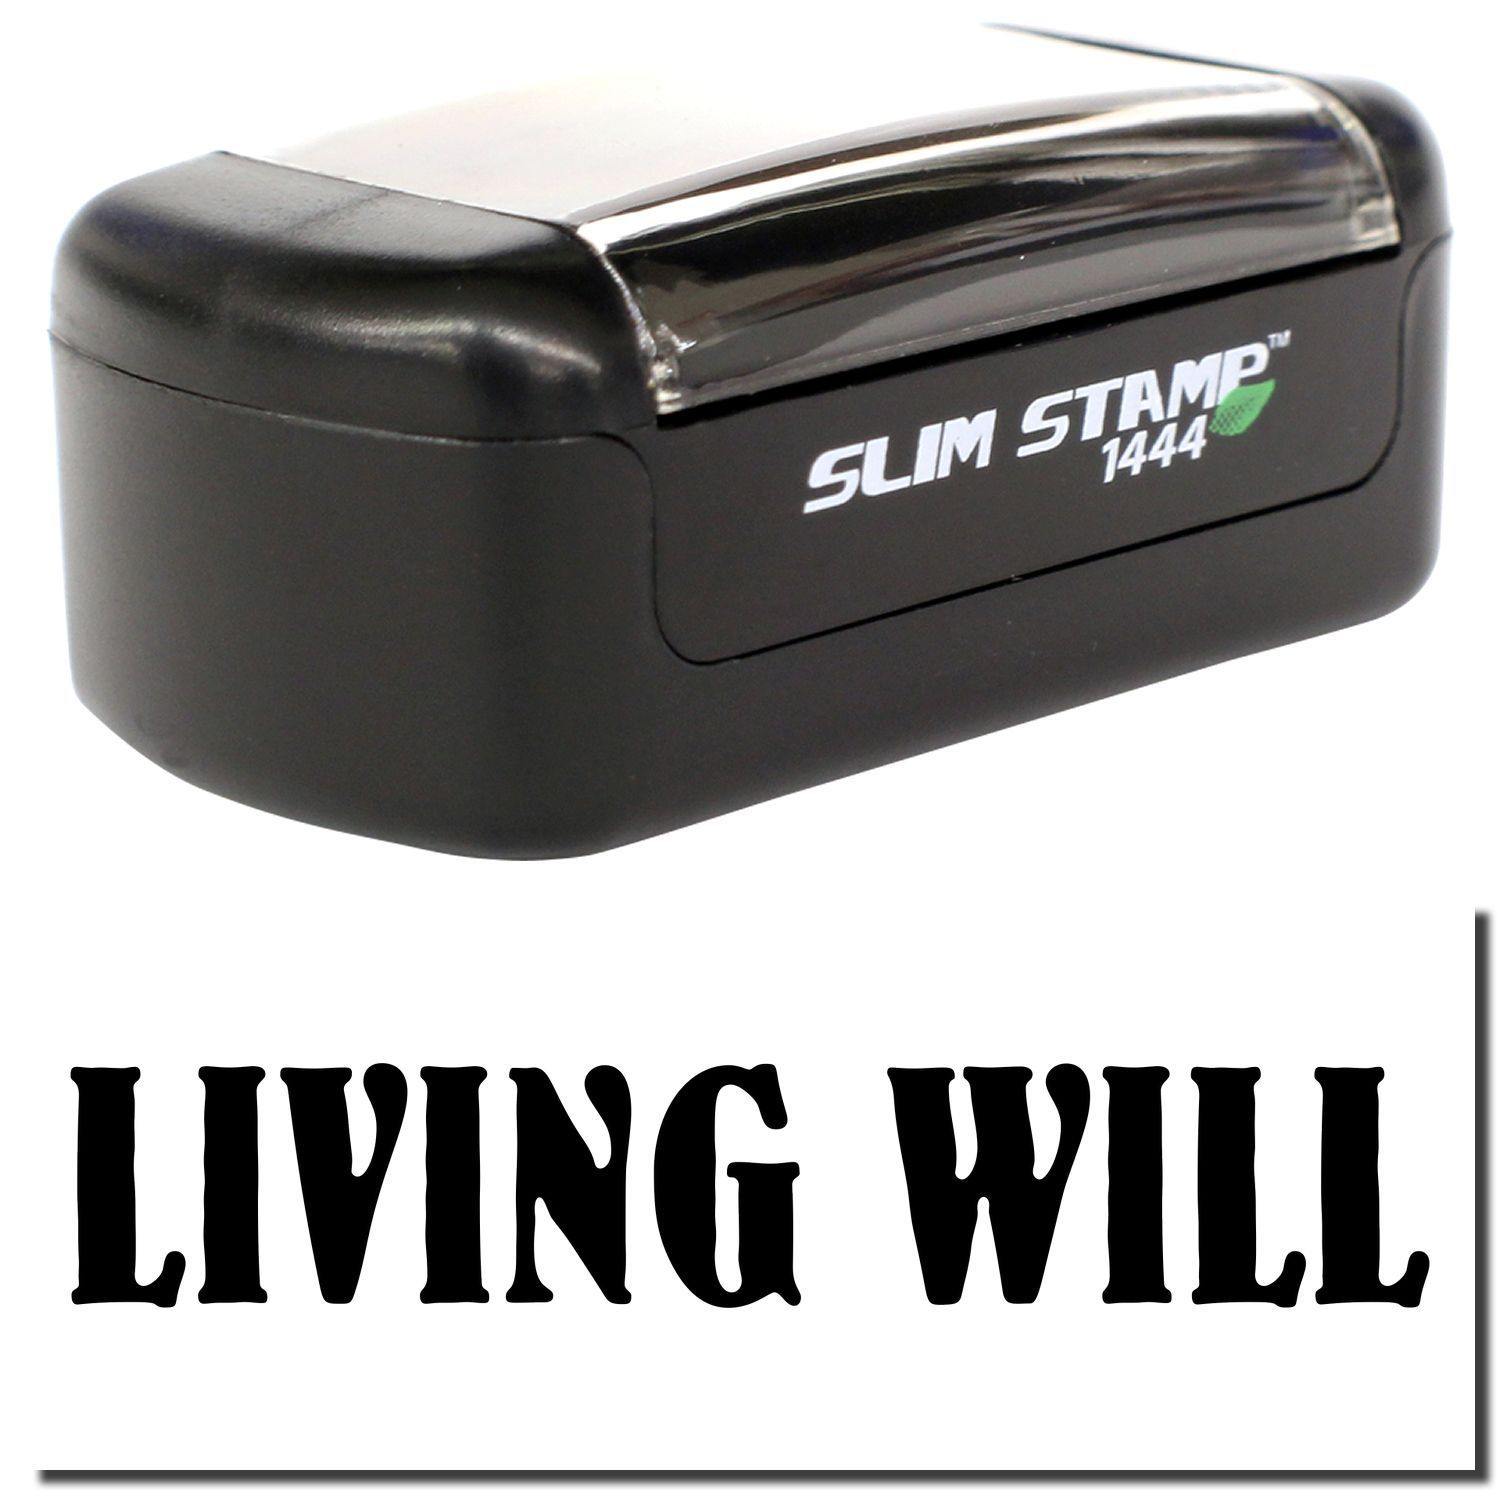 A stock office pre-inked stamp with a stamped image showing how the text "LIVING WILL" is displayed after stamping.